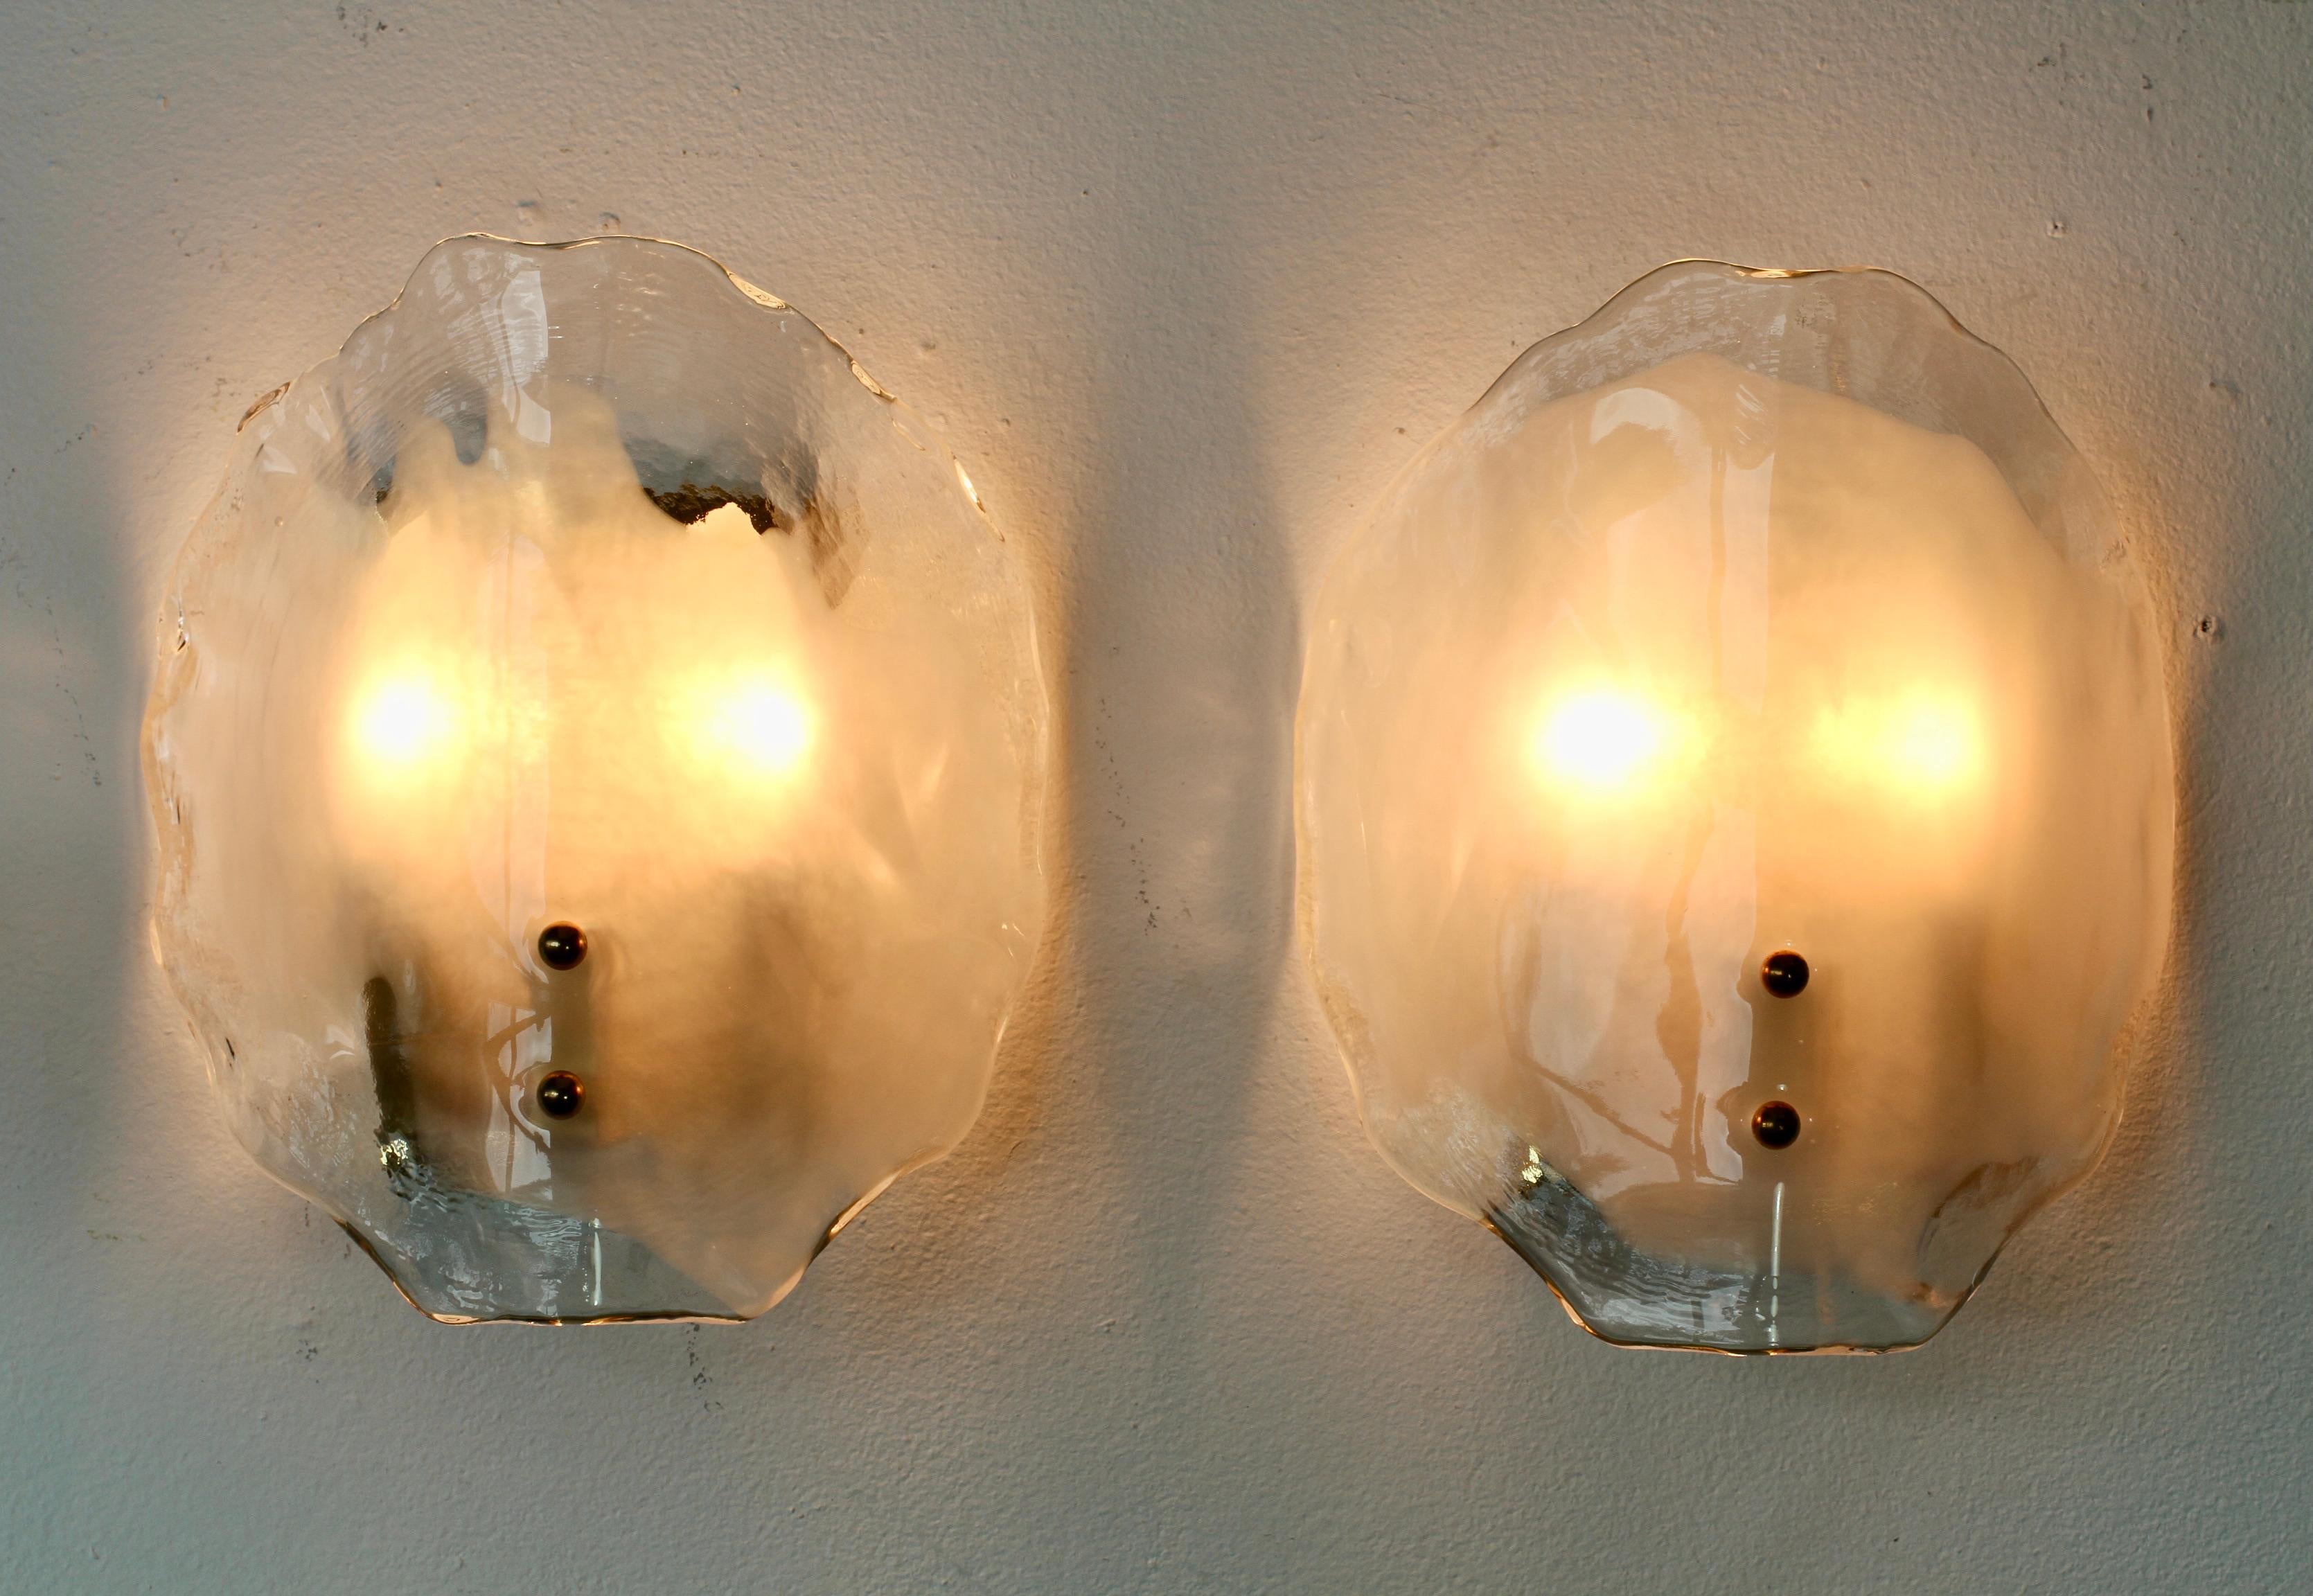 Rare Vintage Mid-Century Modern rare pair of organic brass, white and clear Murano glass double socketed wall lamps, lights or sconces by Austrian lighting manufacturer Kalmar, circa 1970s. Featuring two folded, curved 'flower petal' shaped glass